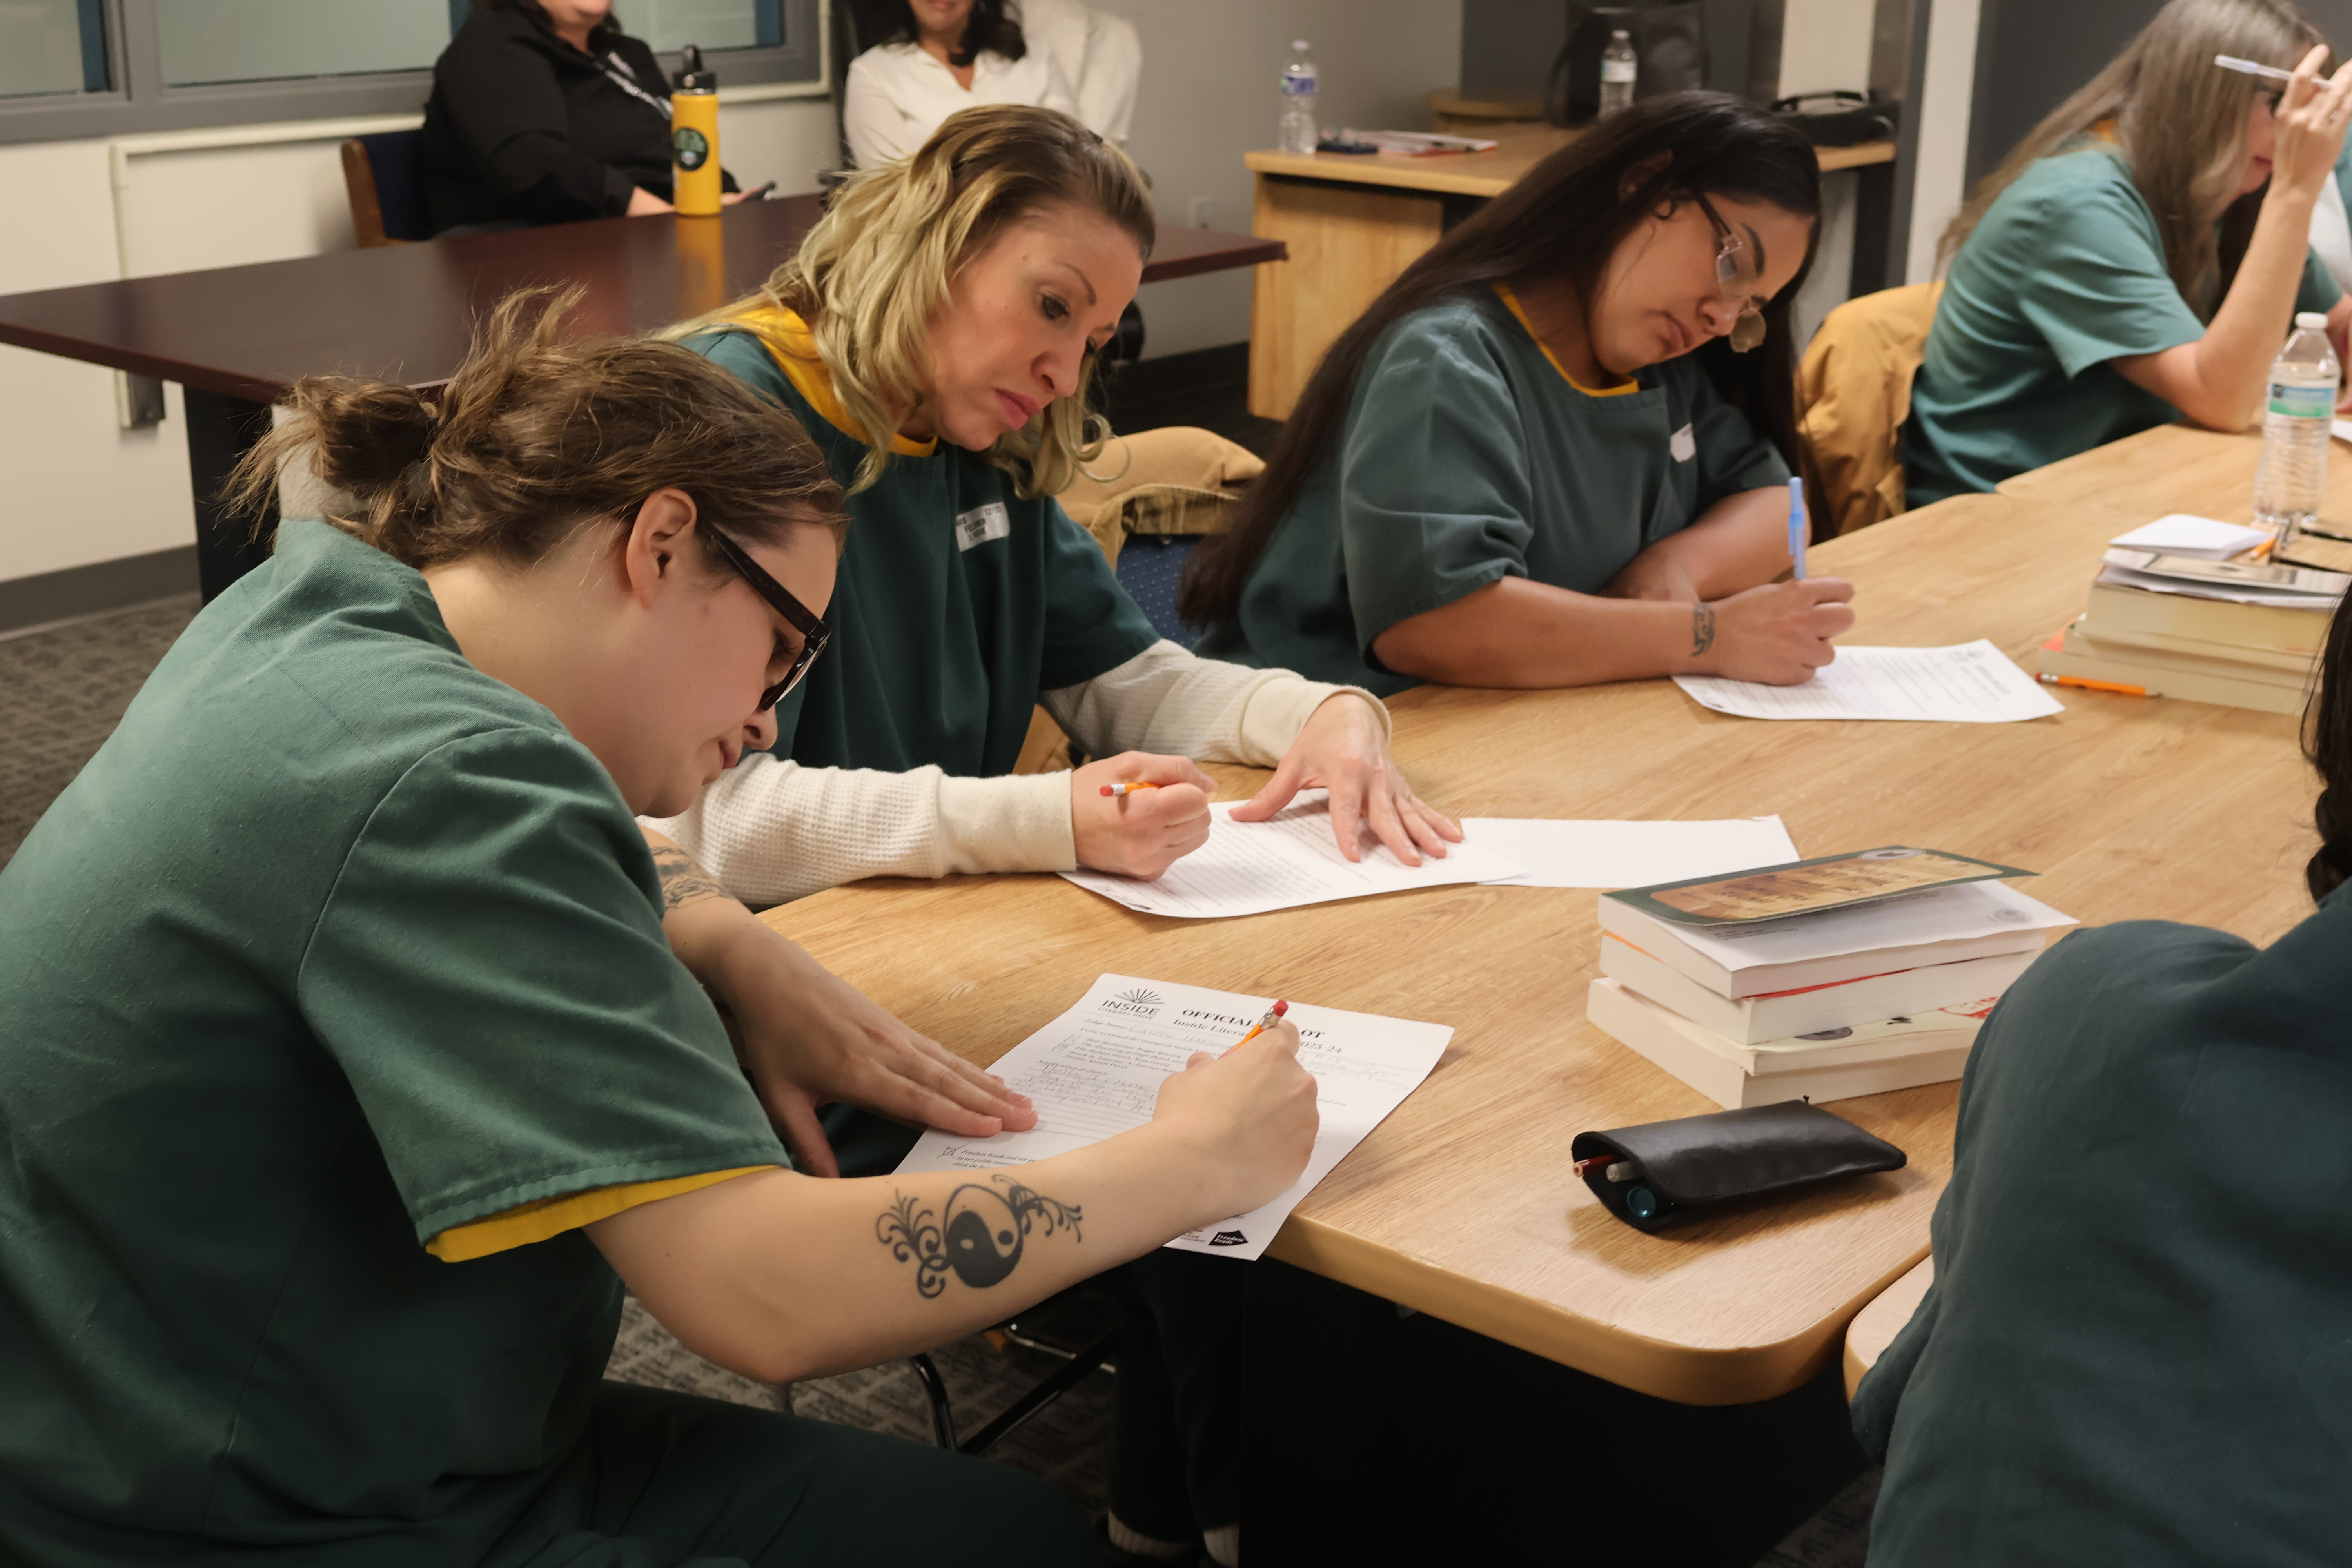 Judges inside at La Vista Correctional Center in Colorado vote on the four shortlisted books for the inaugural Inside Literary Prize.